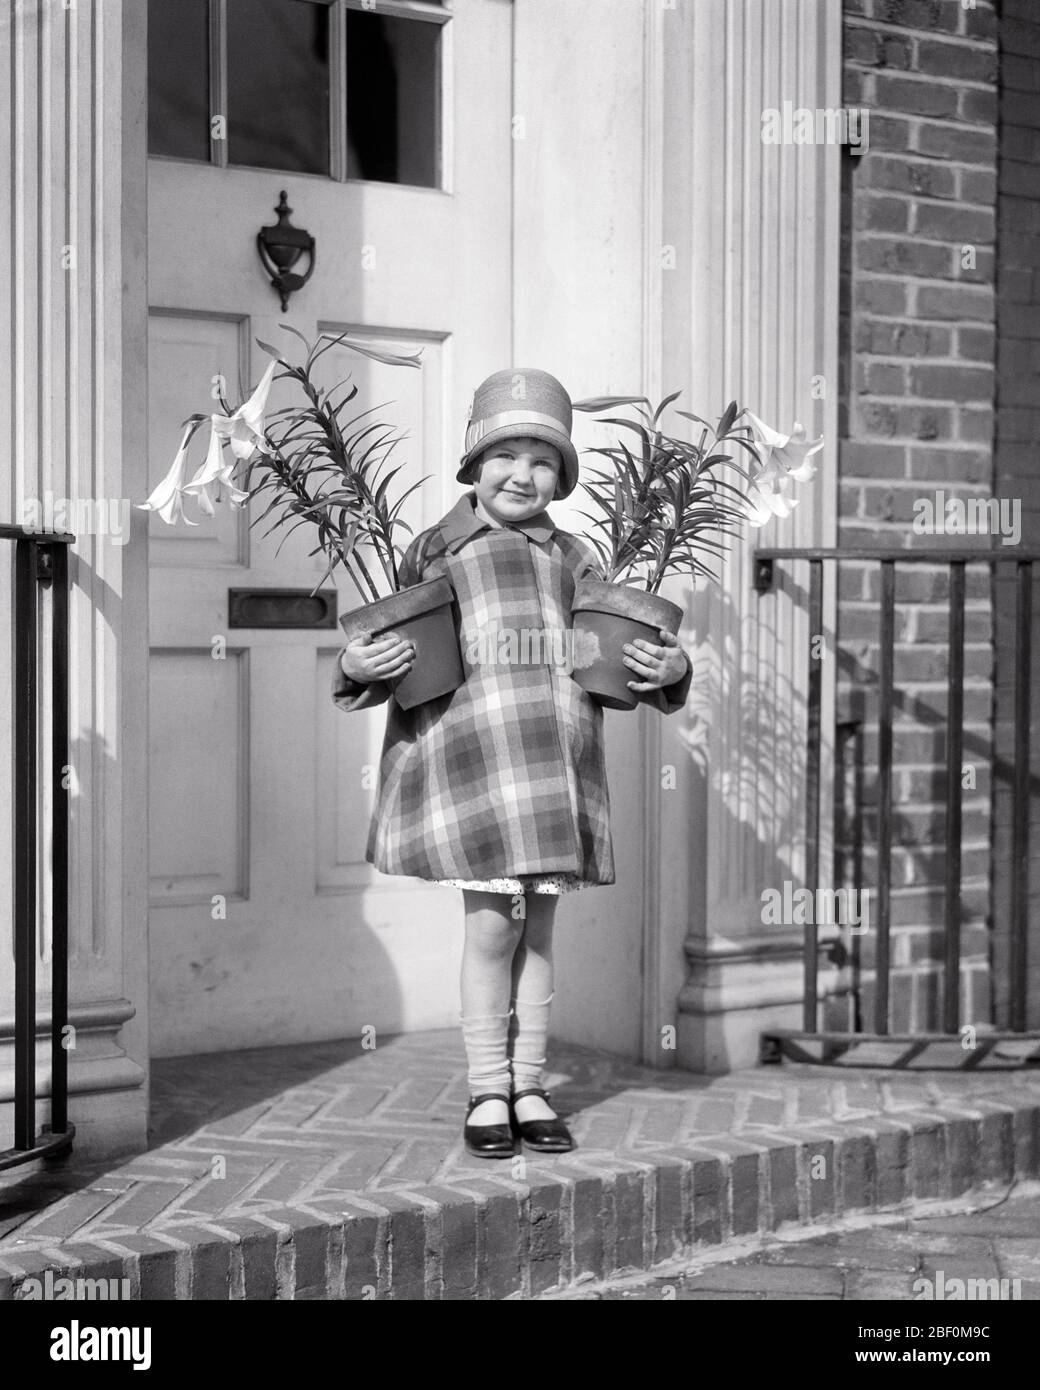 1920s GIRL WEARING CLOCHE HAT PLAID COAT MARY JANE SHOES SOCKS FALLING DOWN HOLDING TWO POTS OF EASTER LILIES AT FRONT DOOR - e89 HAR001 HARS JOY LIFESTYLE SATISFACTION RELIGION FEMALES EASTER HOME LIFE COPY SPACE FRIENDSHIP FULL-LENGTH INSPIRATION FESTIVAL CHRISTIAN PLAID CONFIDENCE MARY B&W EYE CONTACT CHEERFUL CHRISTIANITY EXTERIOR CLOCHE SMILES CONNECTION JOYFUL STYLISH LILIES JANE JUVENILES BLACK AND WHITE HAR001 OLD FASHIONED Stock Photo